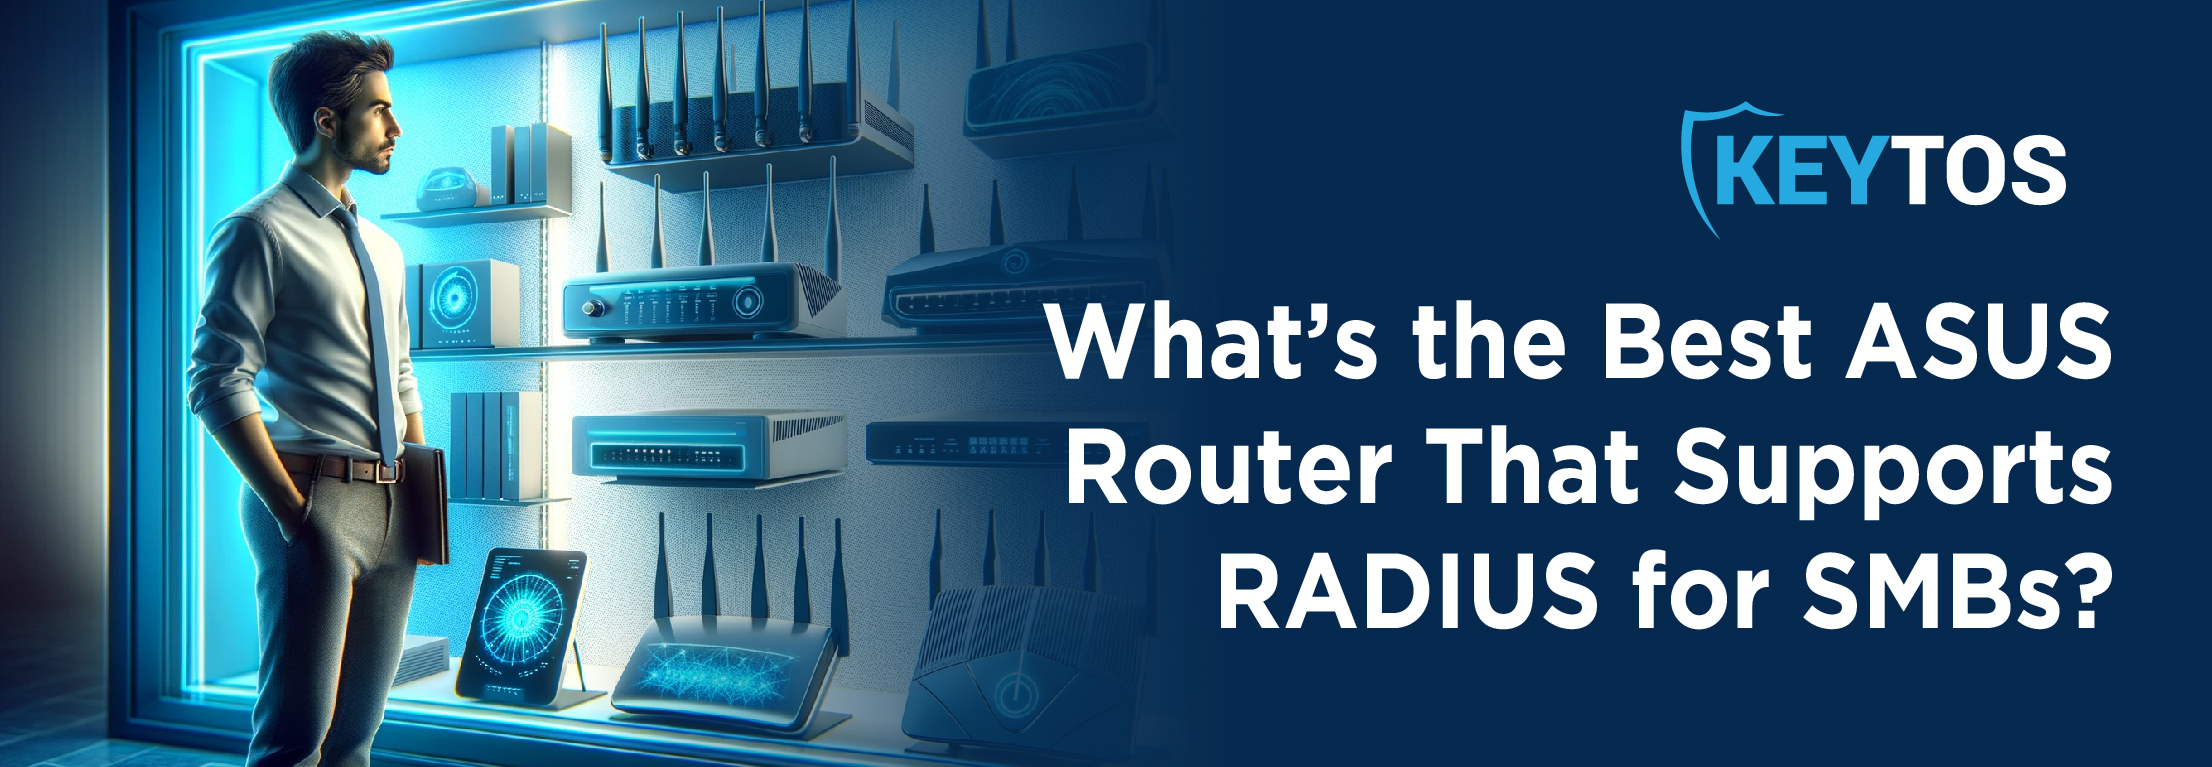 What’s the Best ASUS Router That Supports RADIUS for SMBs?